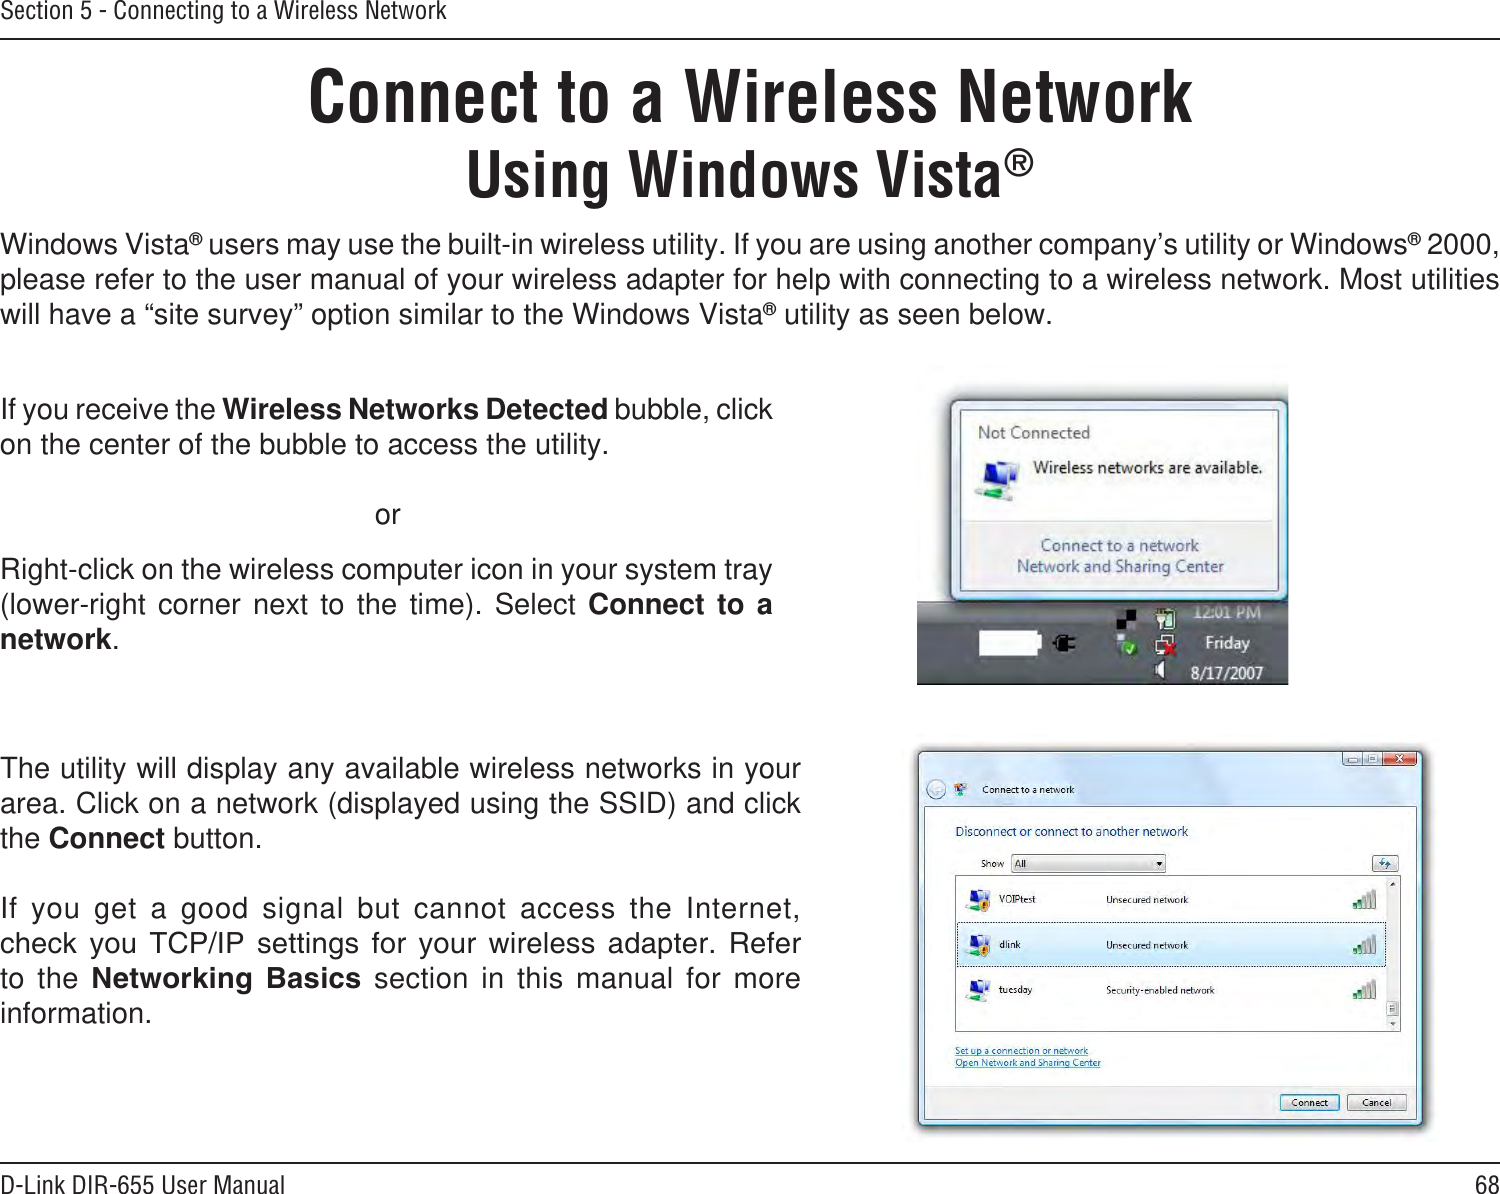 68D-Link DIR-655 User ManualSection 5 - Connecting to a Wireless NetworkConnect to a Wireless NetworkUsing Windows Vista®Windows Vista® users may use the built-in wireless utility. If you are using another company’s utility or Windows® 2000, please refer to the user manual of your wireless adapter for help with connecting to a wireless network. Most utilities will have a “site survey” option similar to the Windows Vista® utility as seen below.Right-click on the wireless computer icon in your system tray (lower-right  corner  next  to  the  time).  Select  Connect  to  a network.If you receive the Wireless Networks Detected bubble, click on the center of the bubble to access the utility.     orThe utility will display any available wireless networks in your area. Click on a network (displayed using the SSID) and click the Connect button.If  you  get  a  good  signal  but  cannot  access  the  Internet,         to  the     section  in  this  manual  for  more information.